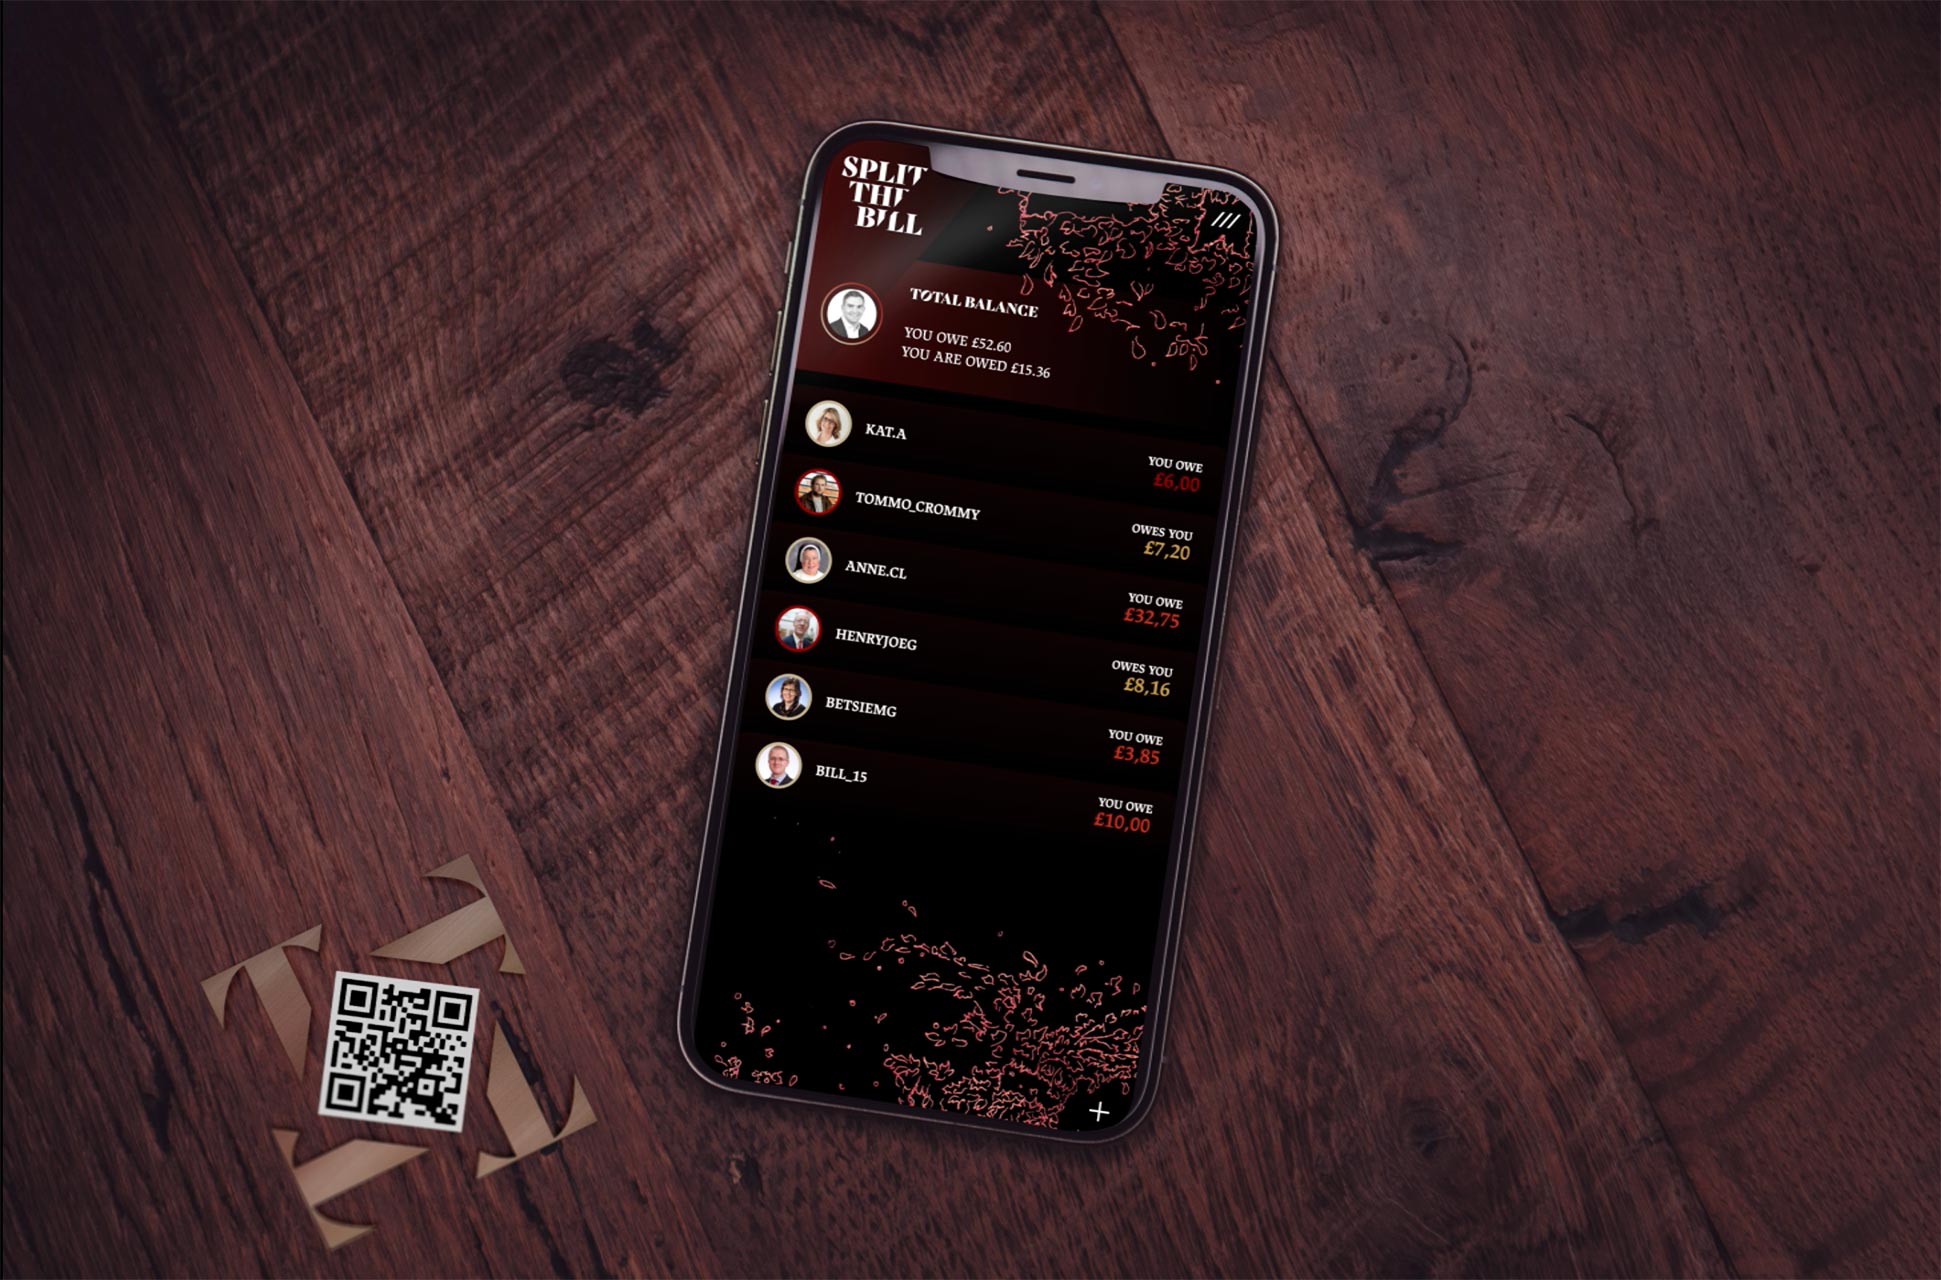 Prototype mockup of a restaurant payment app